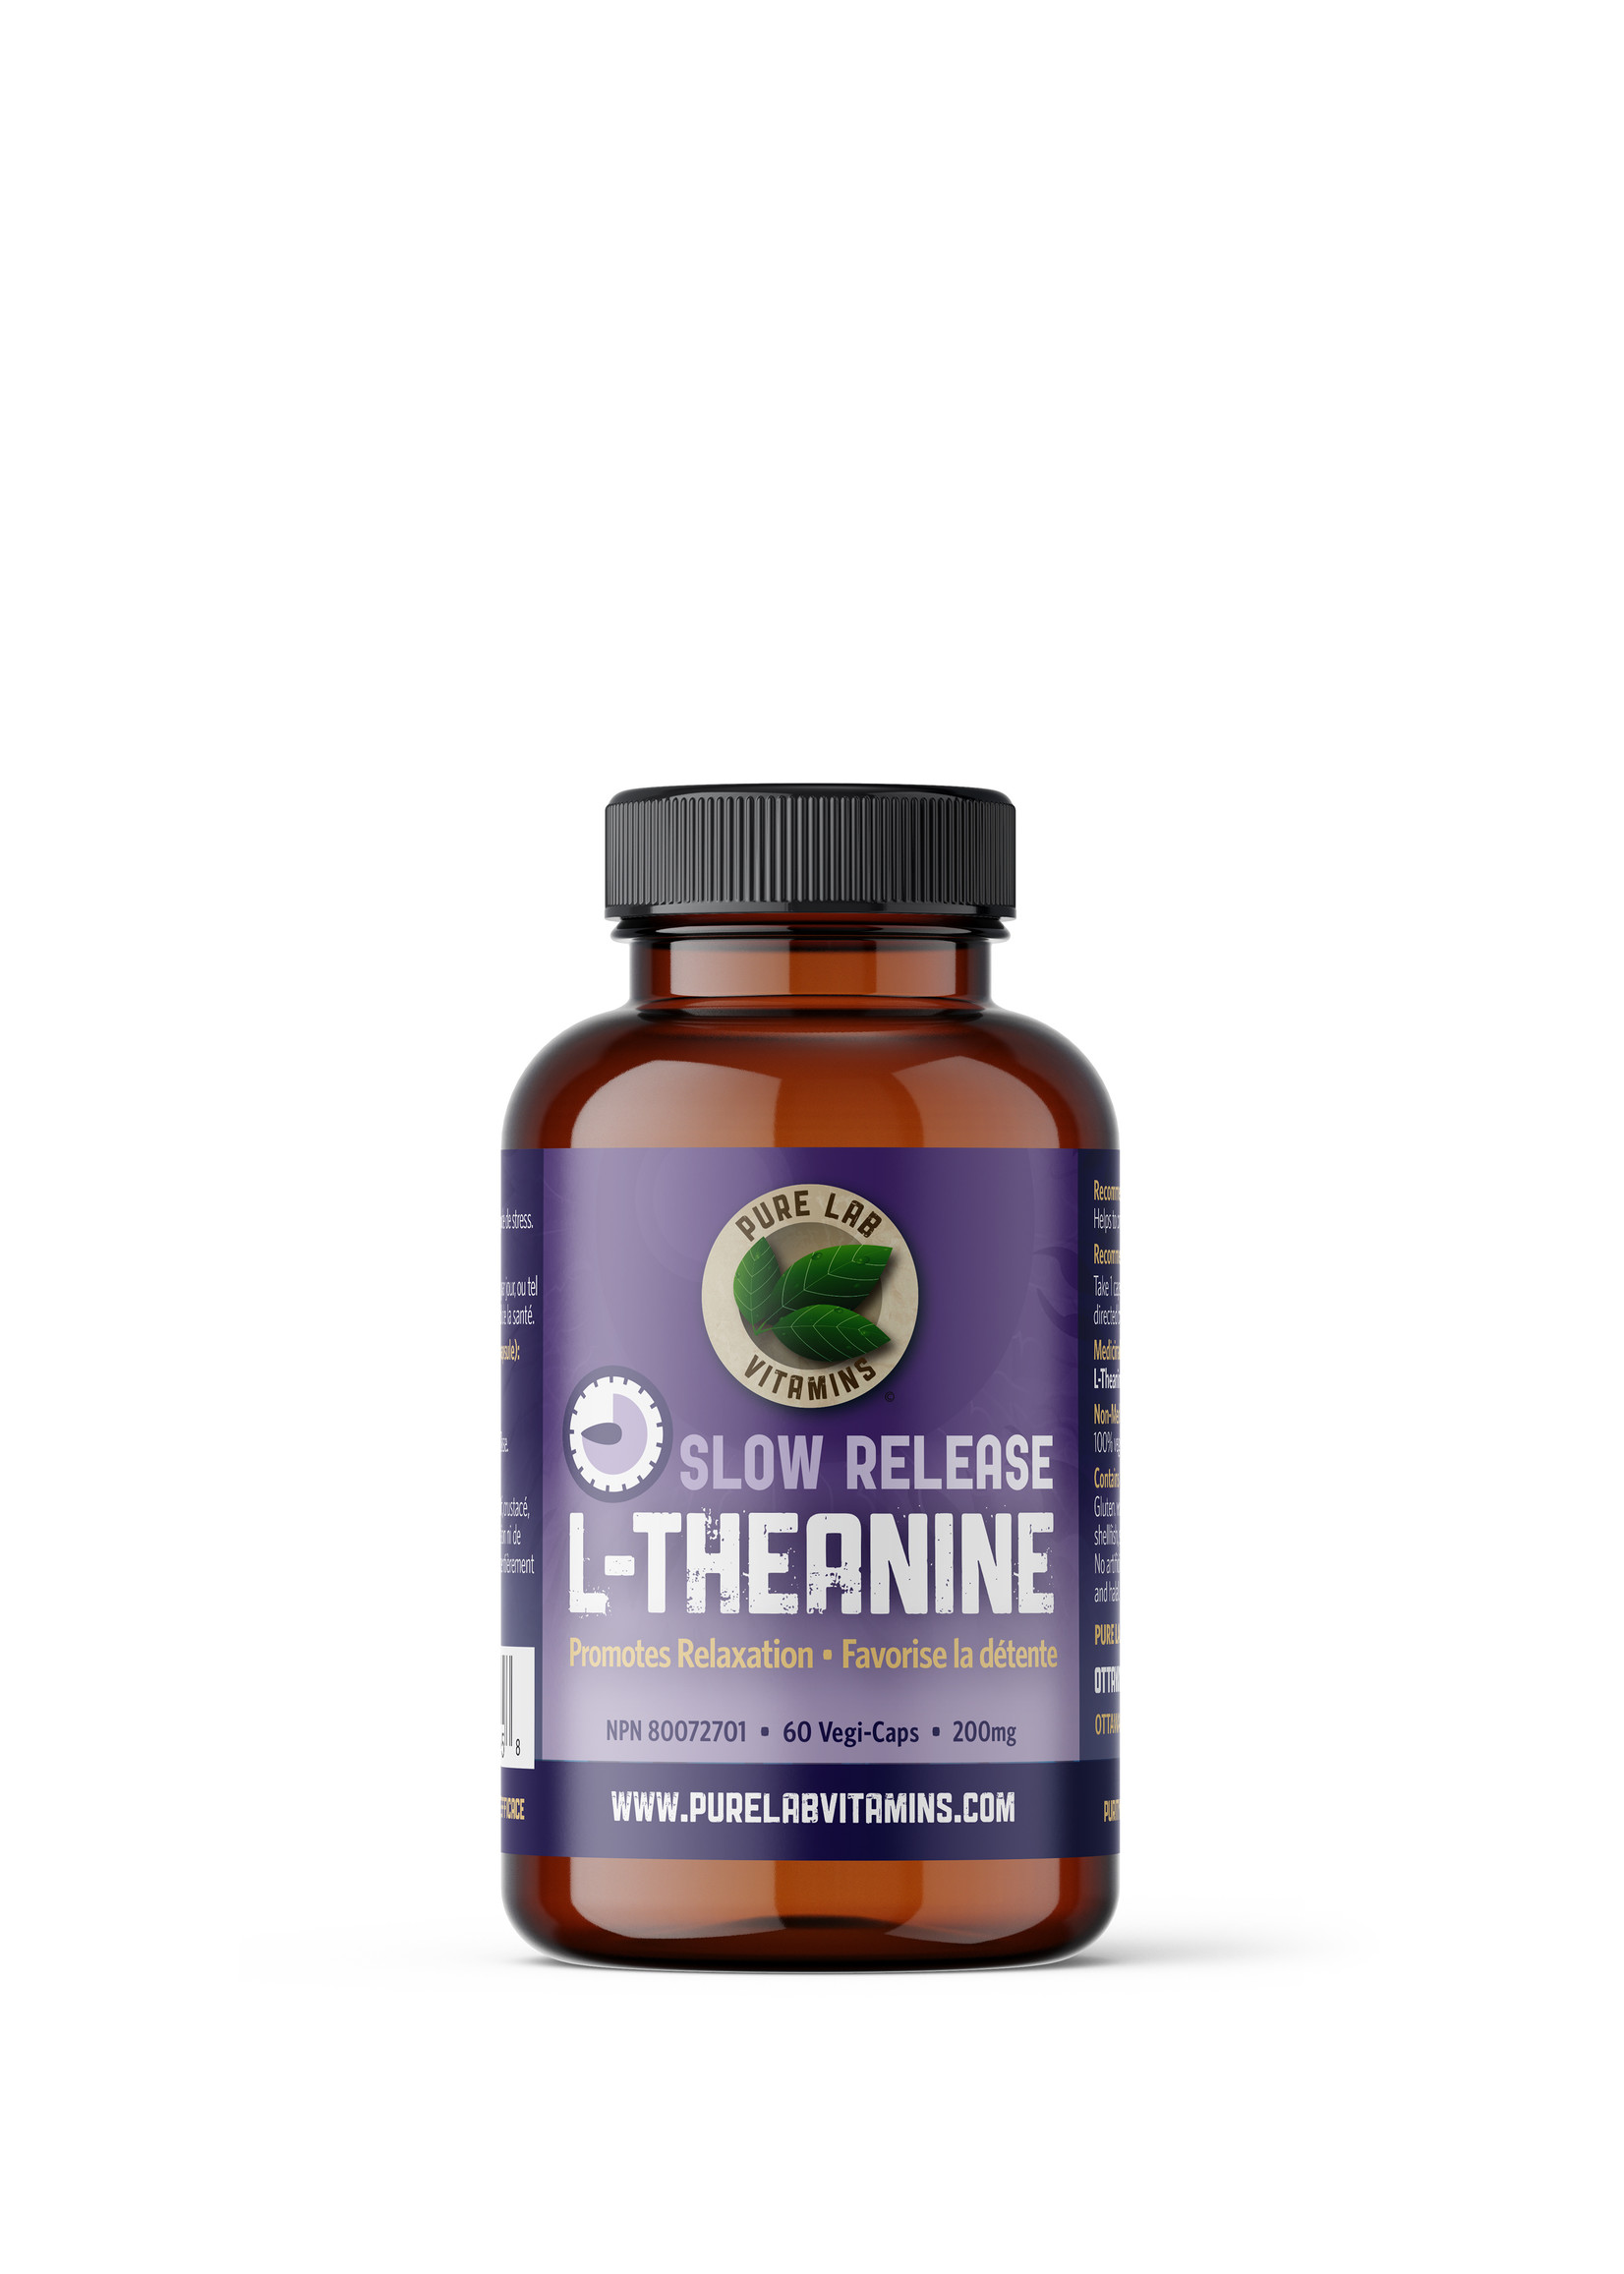 Pure lab Pure Lab L-Theanine Slow Release 200mg